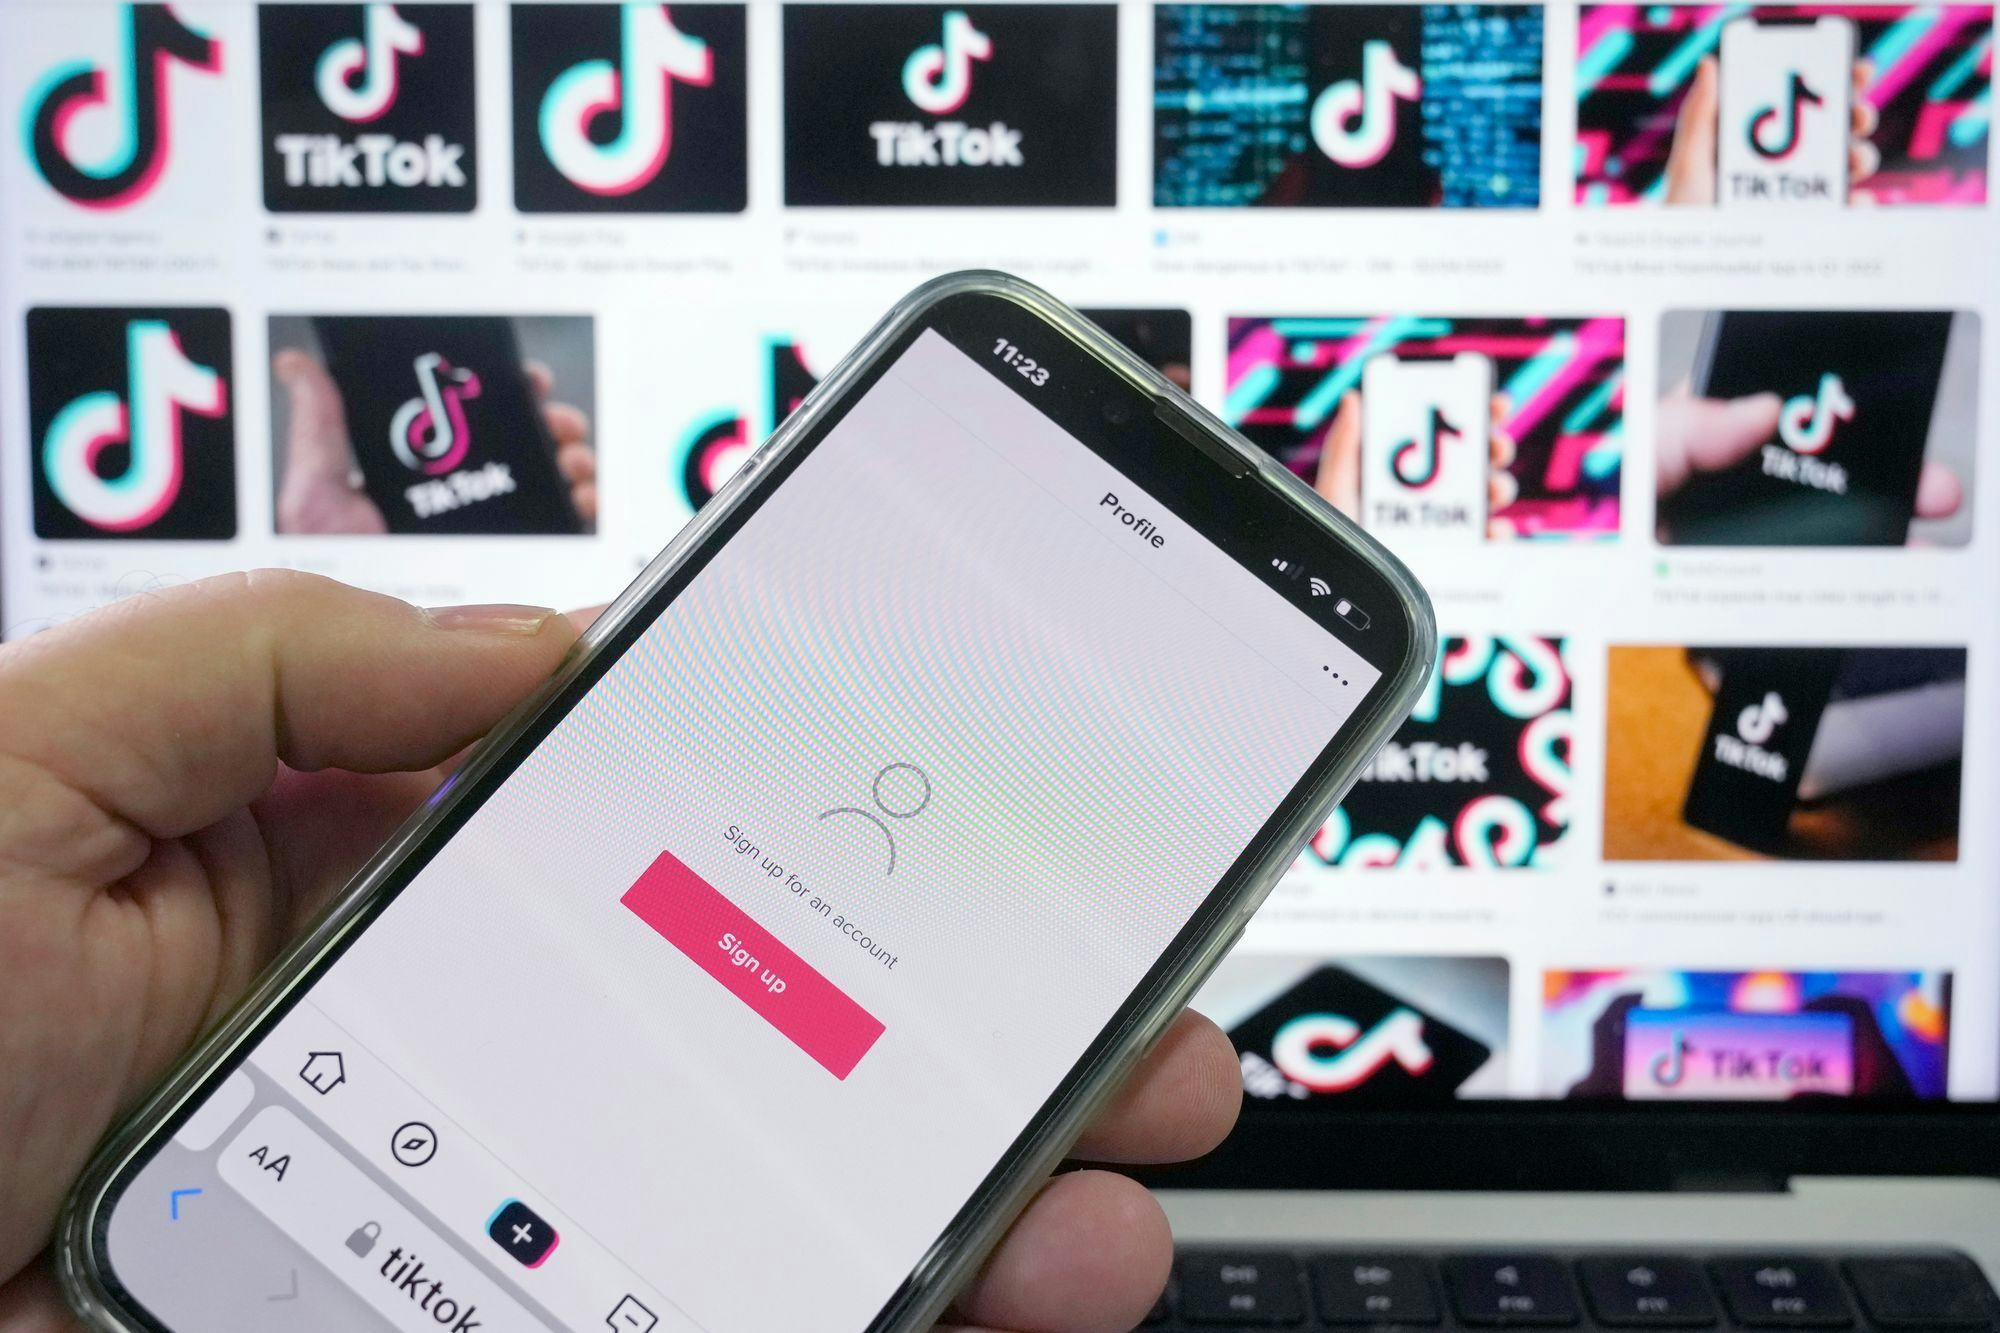 A sign up page for the application TikTok is shown on a cell phone in front of a screen with logos for the company.